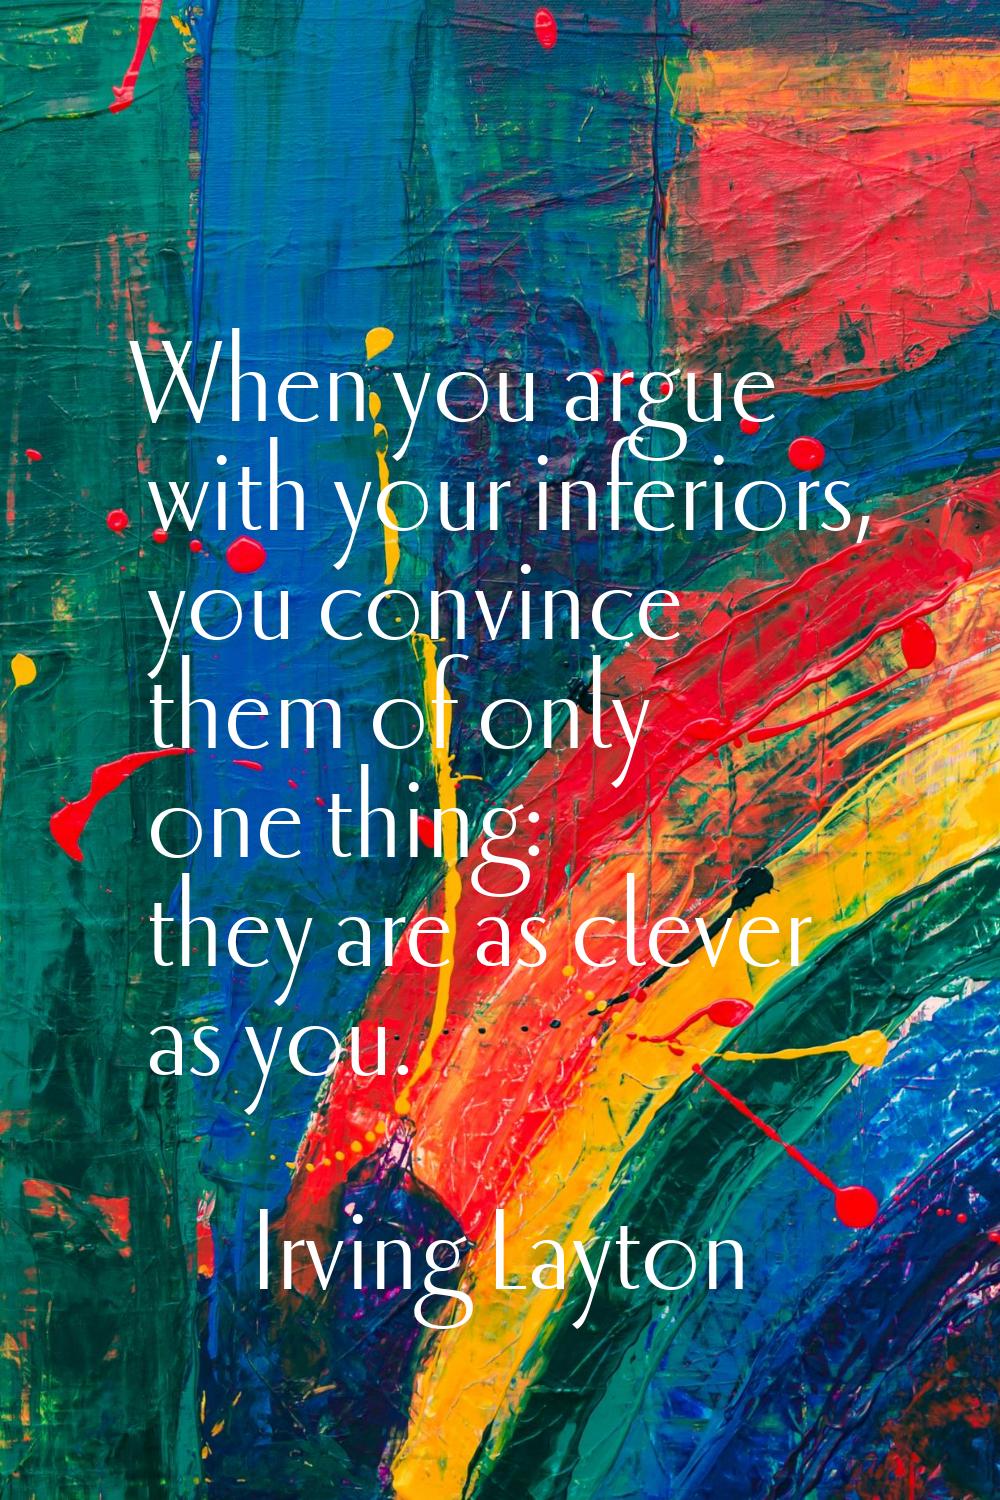 When you argue with your inferiors, you convince them of only one thing: they are as clever as you.